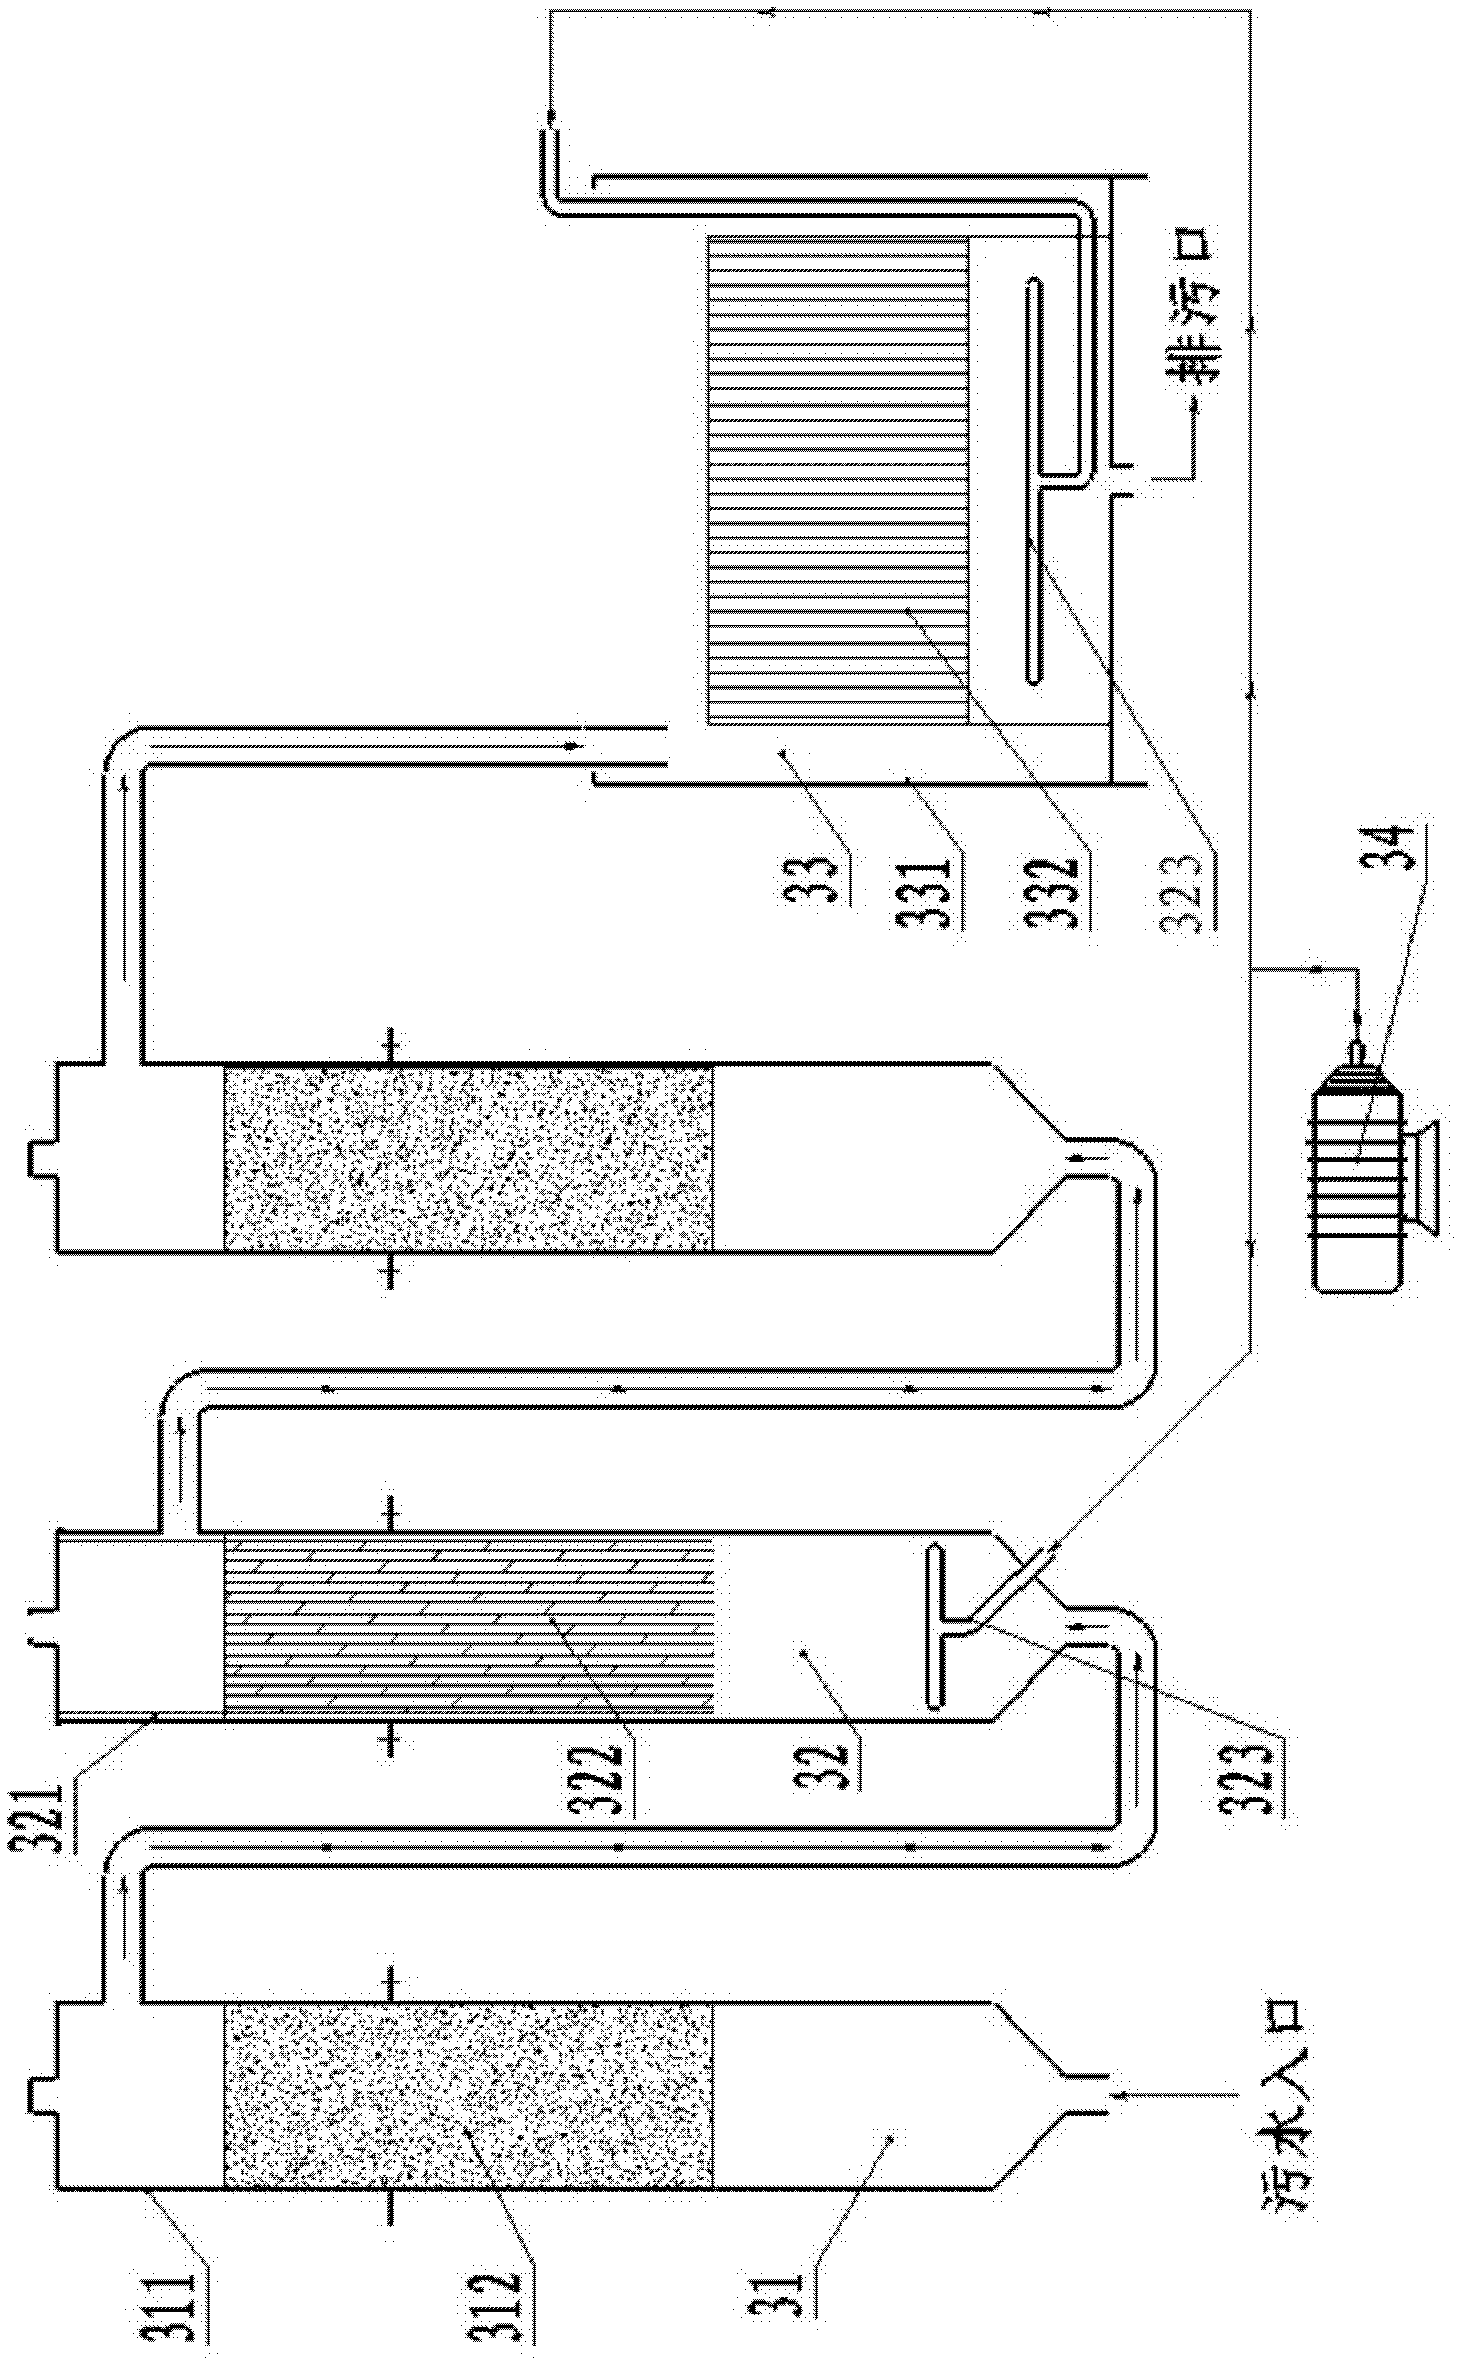 Processing system for solid and liquid organic waste materials